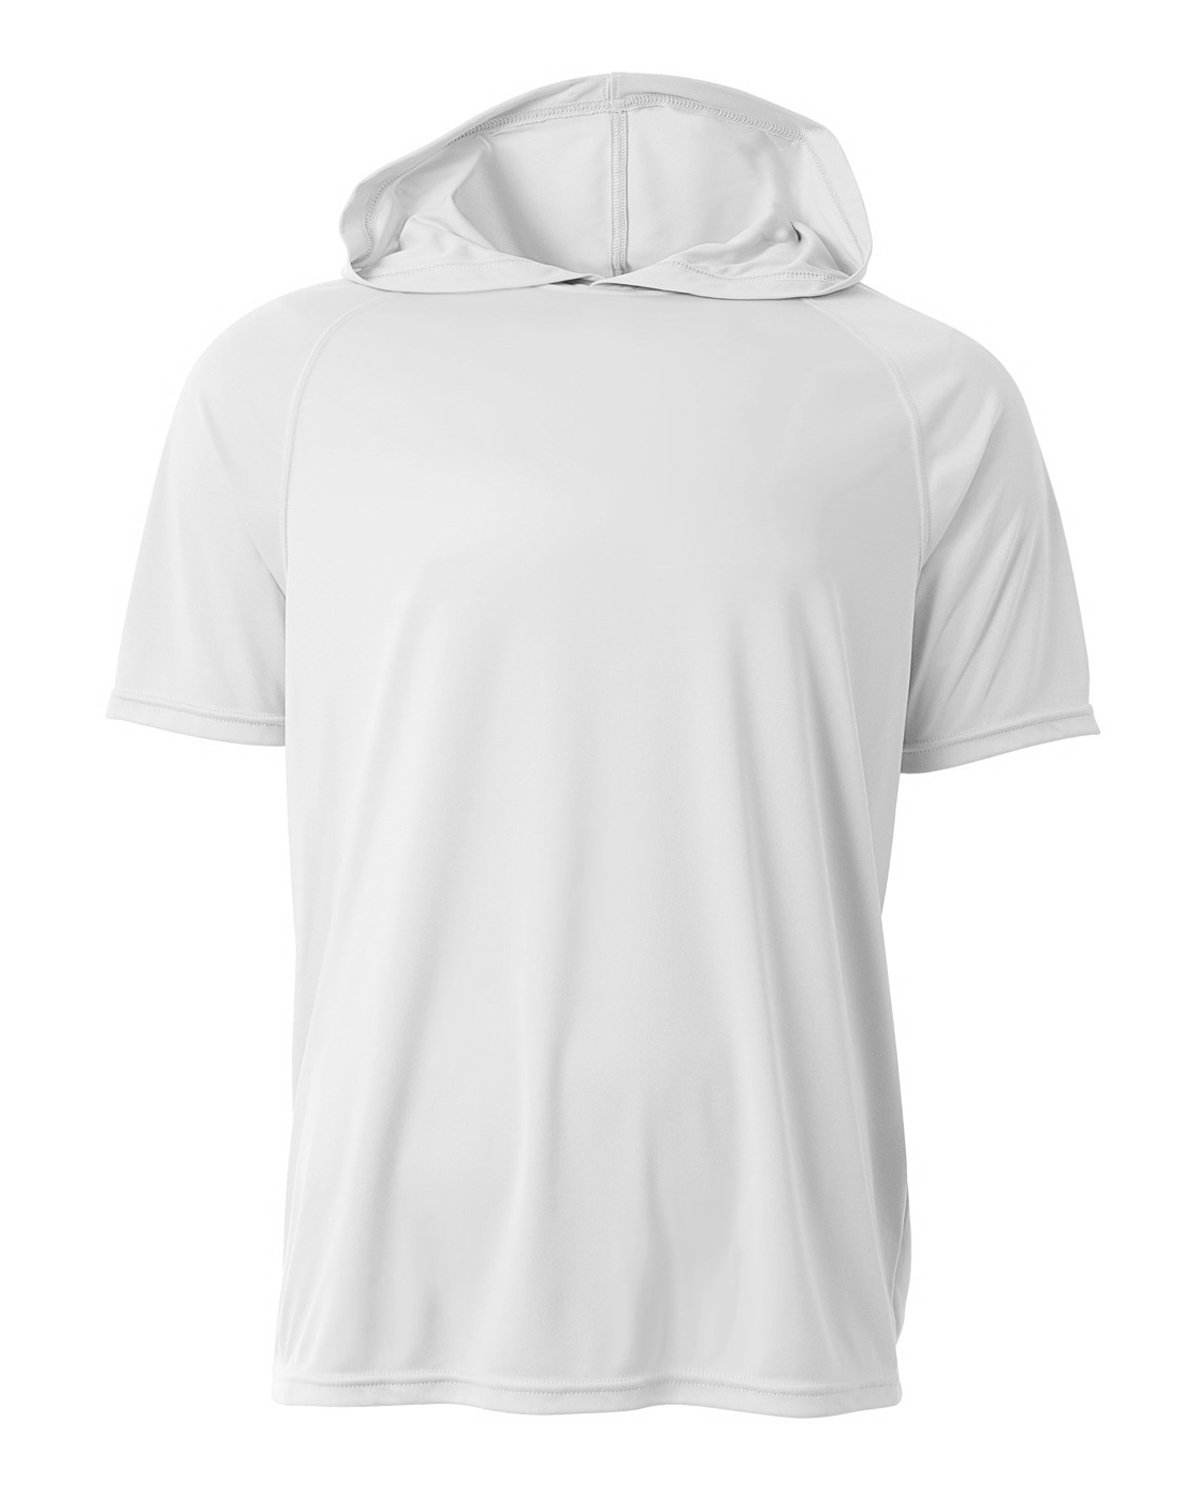 Youth Hooded T-Shirt-